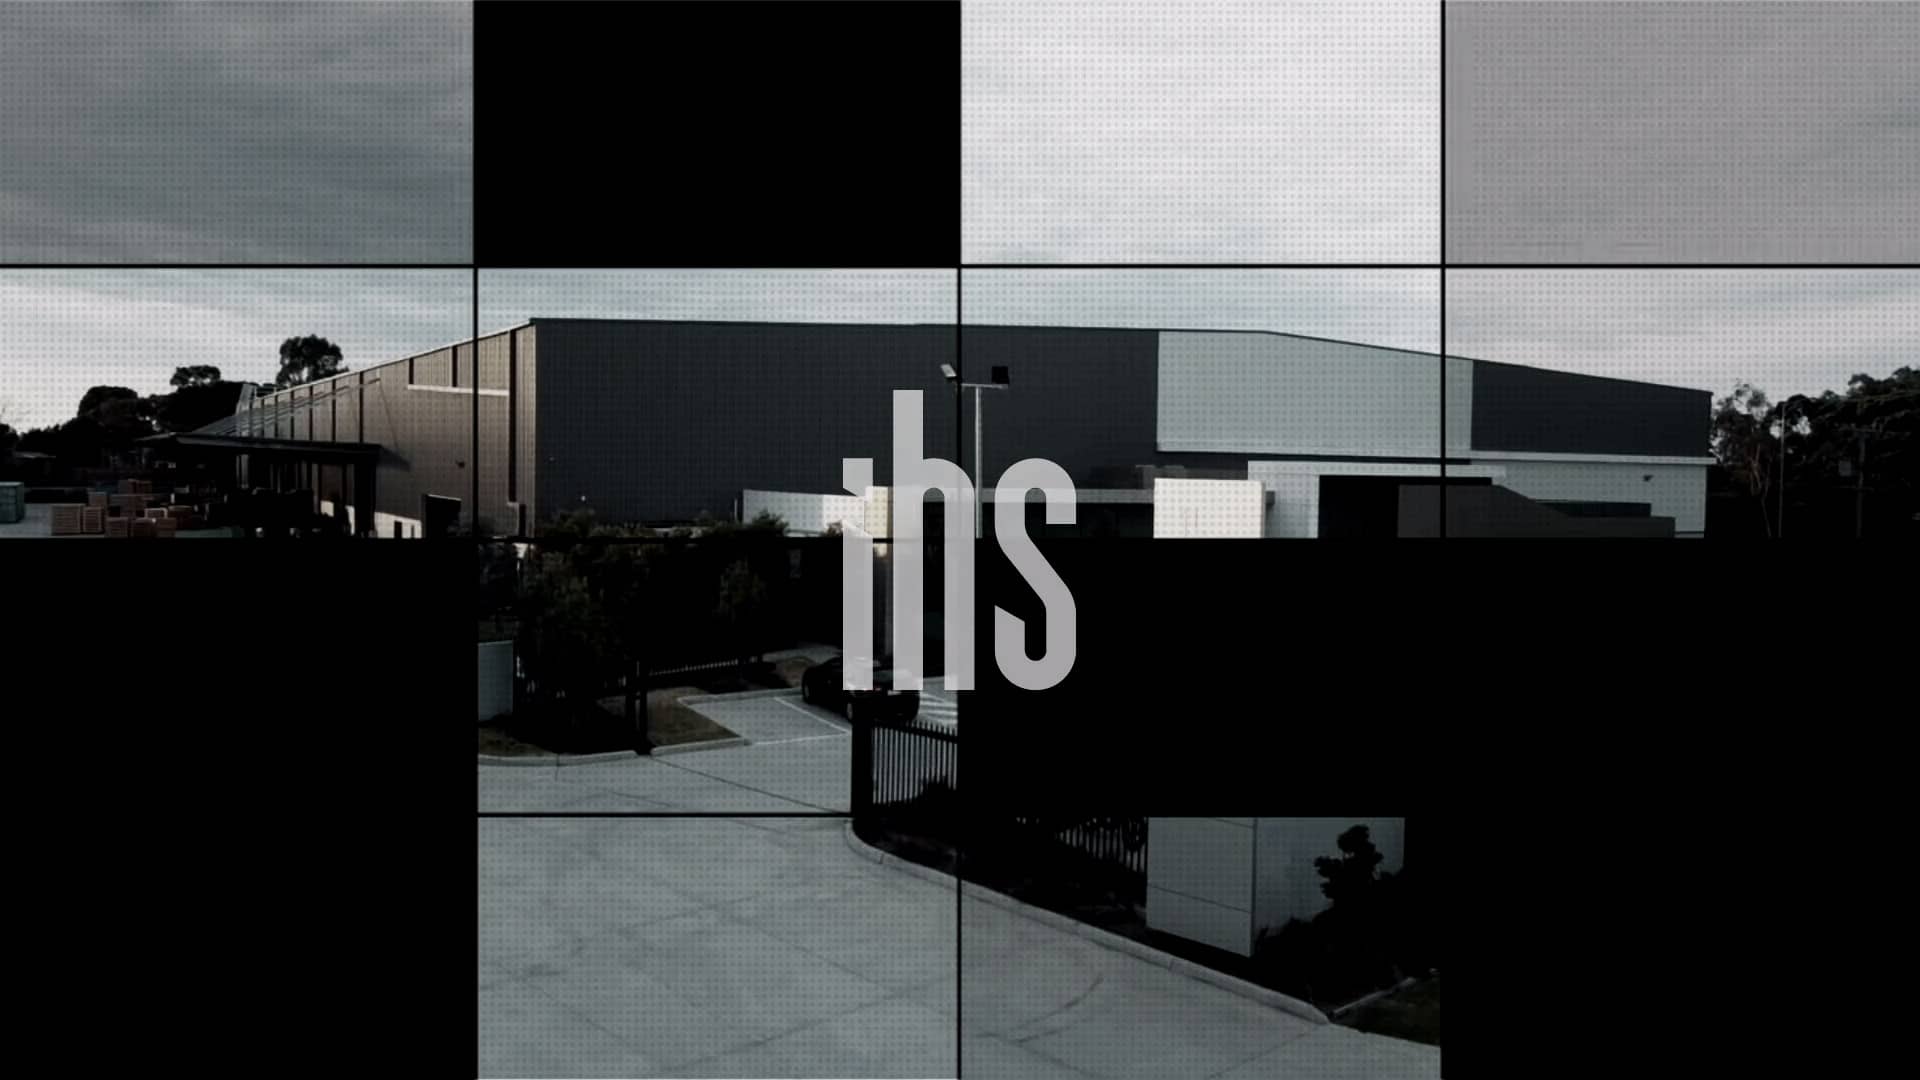 Video introducing IHS Design - global designer and manufacturer of high-performing hospitality equipment and furnishings.